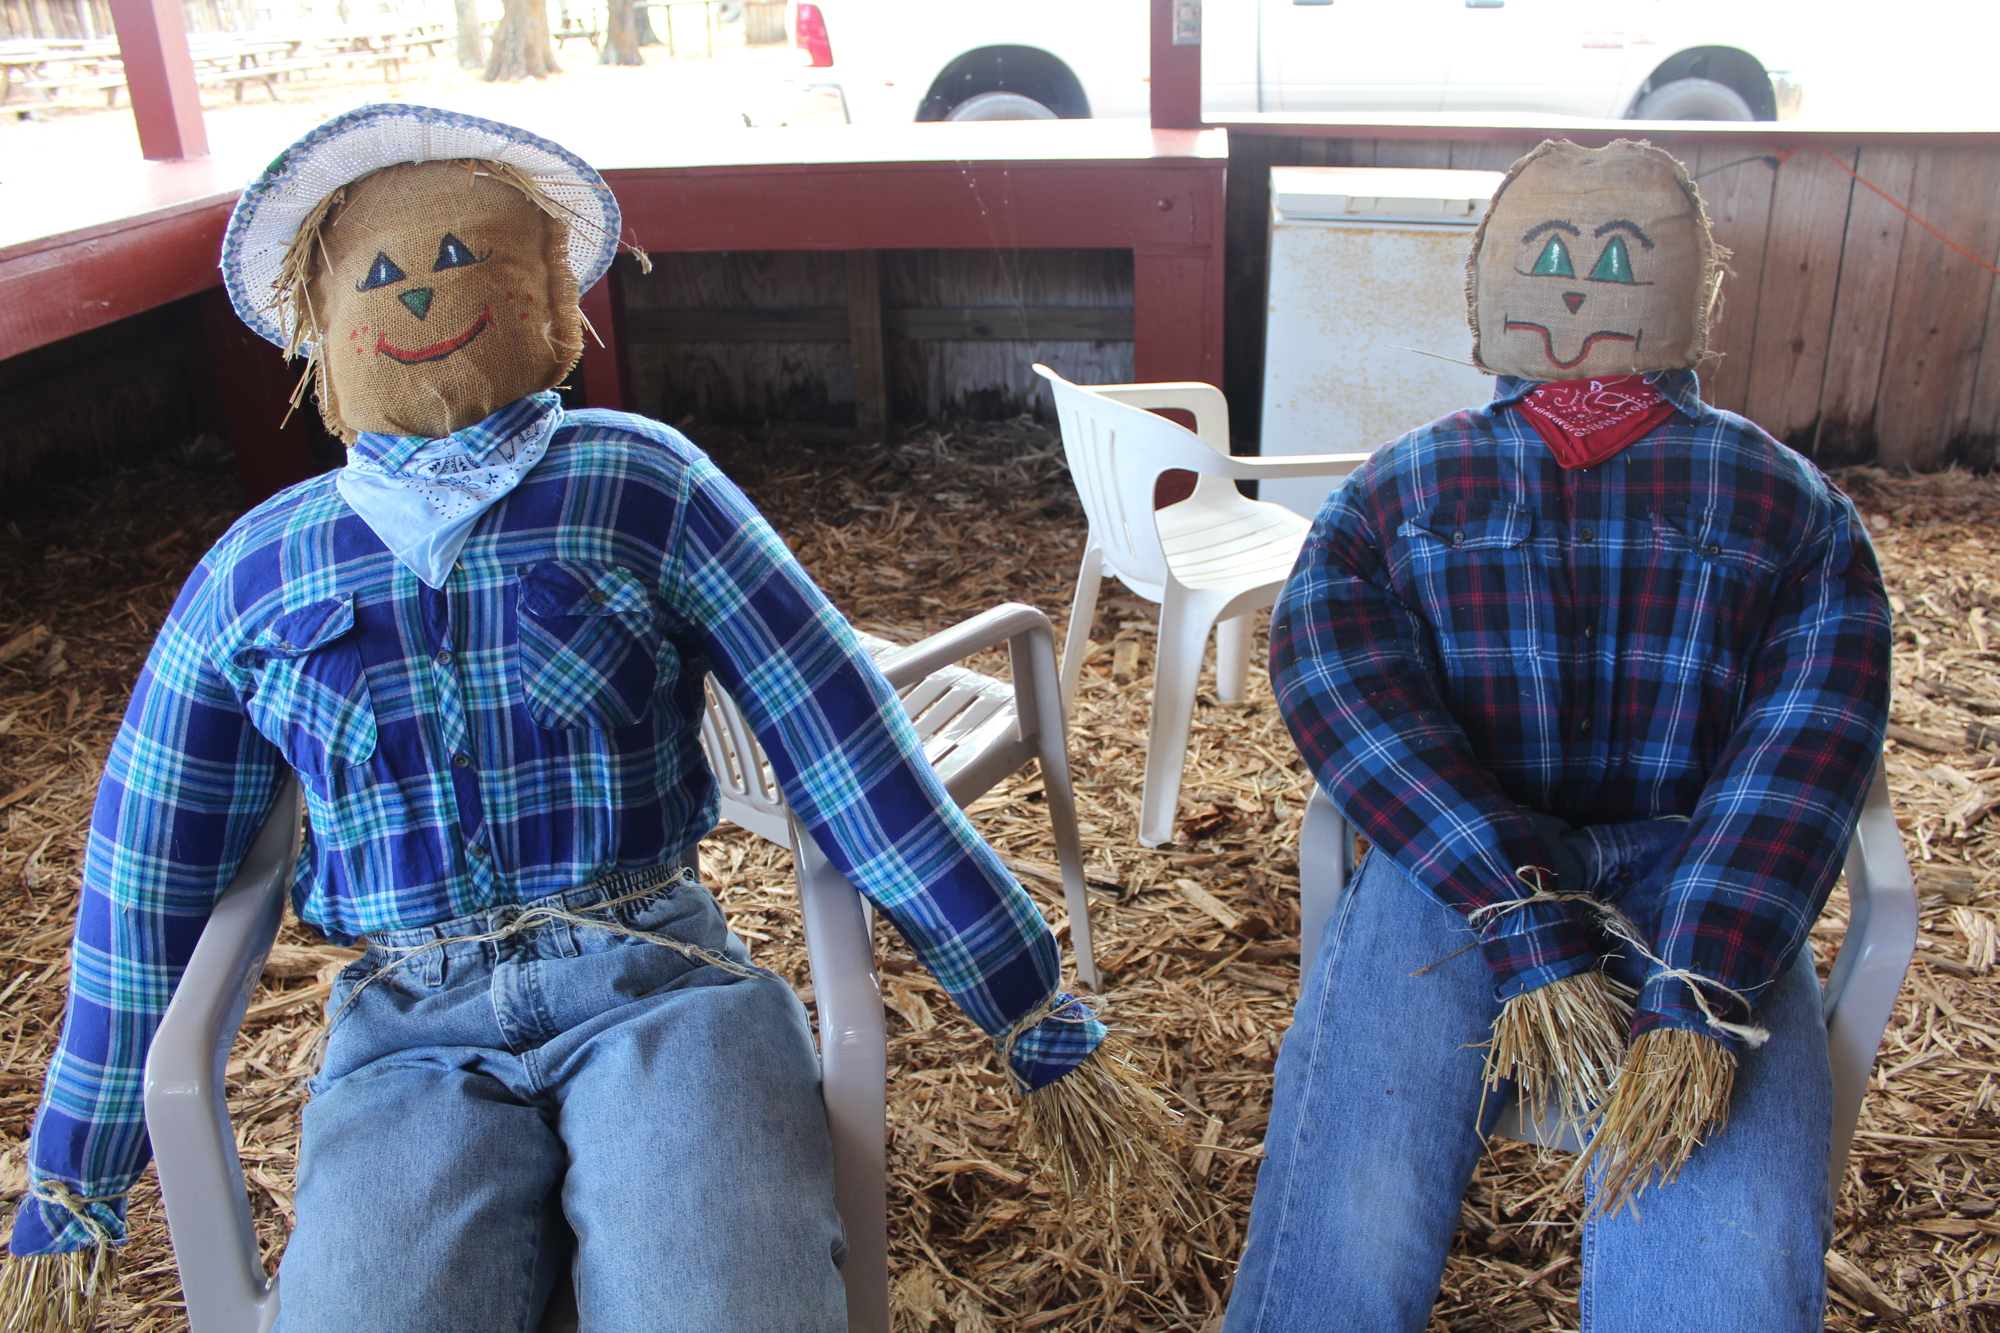 Connie Hunsader, 79, is building 40 scarecrows for this year’s Pumpkin Festival, including this cute couple.